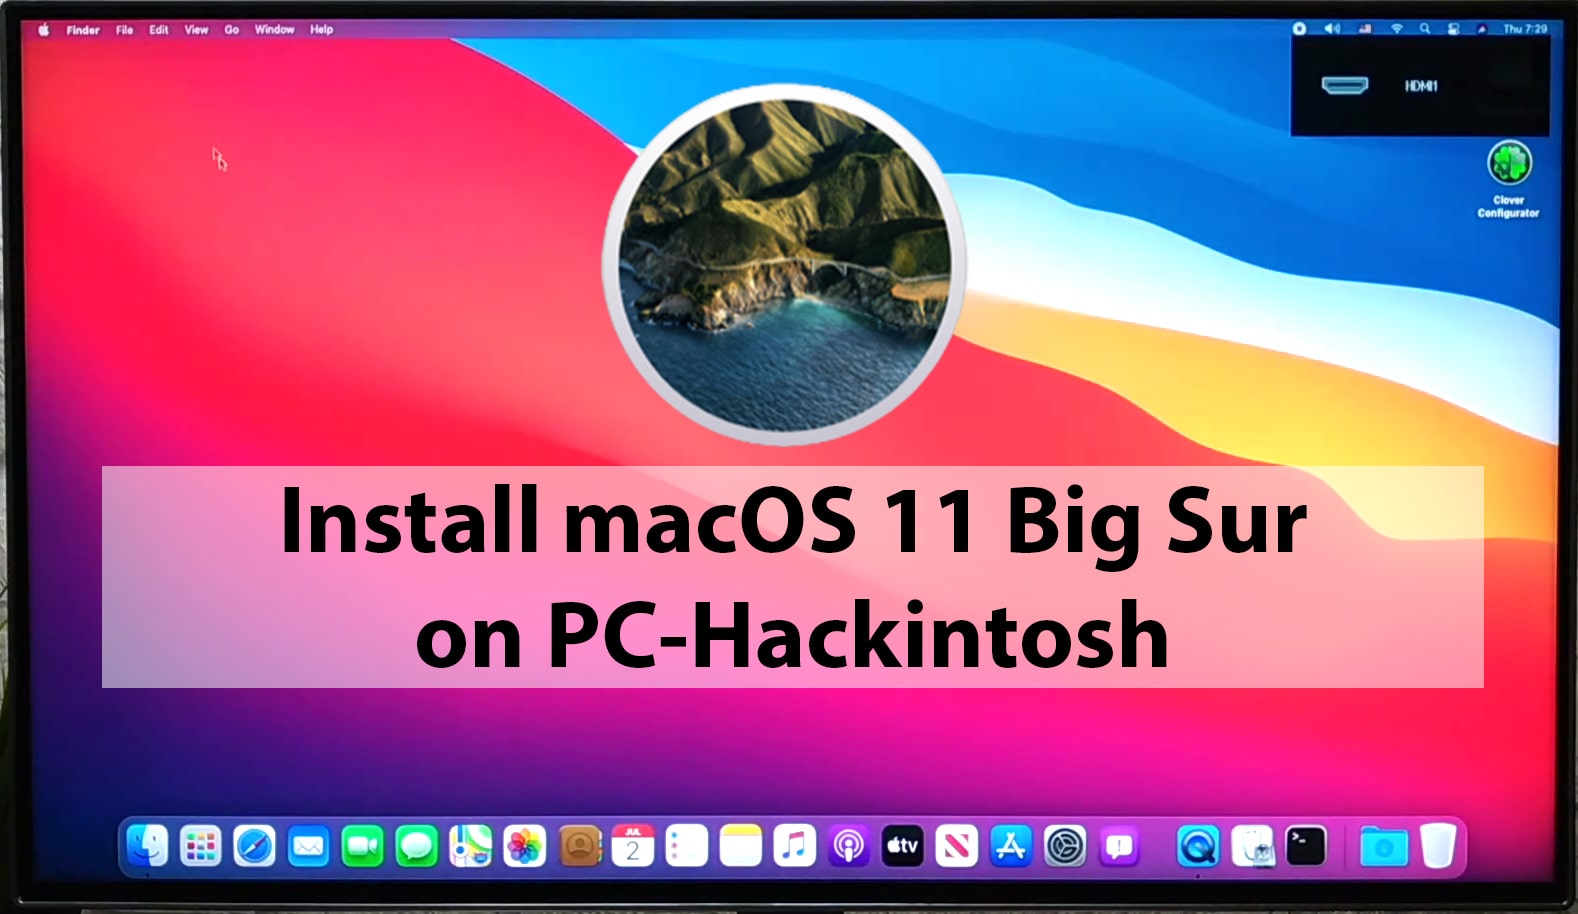 How to Install macOS 11 Big Sur on PC-Hackintosh